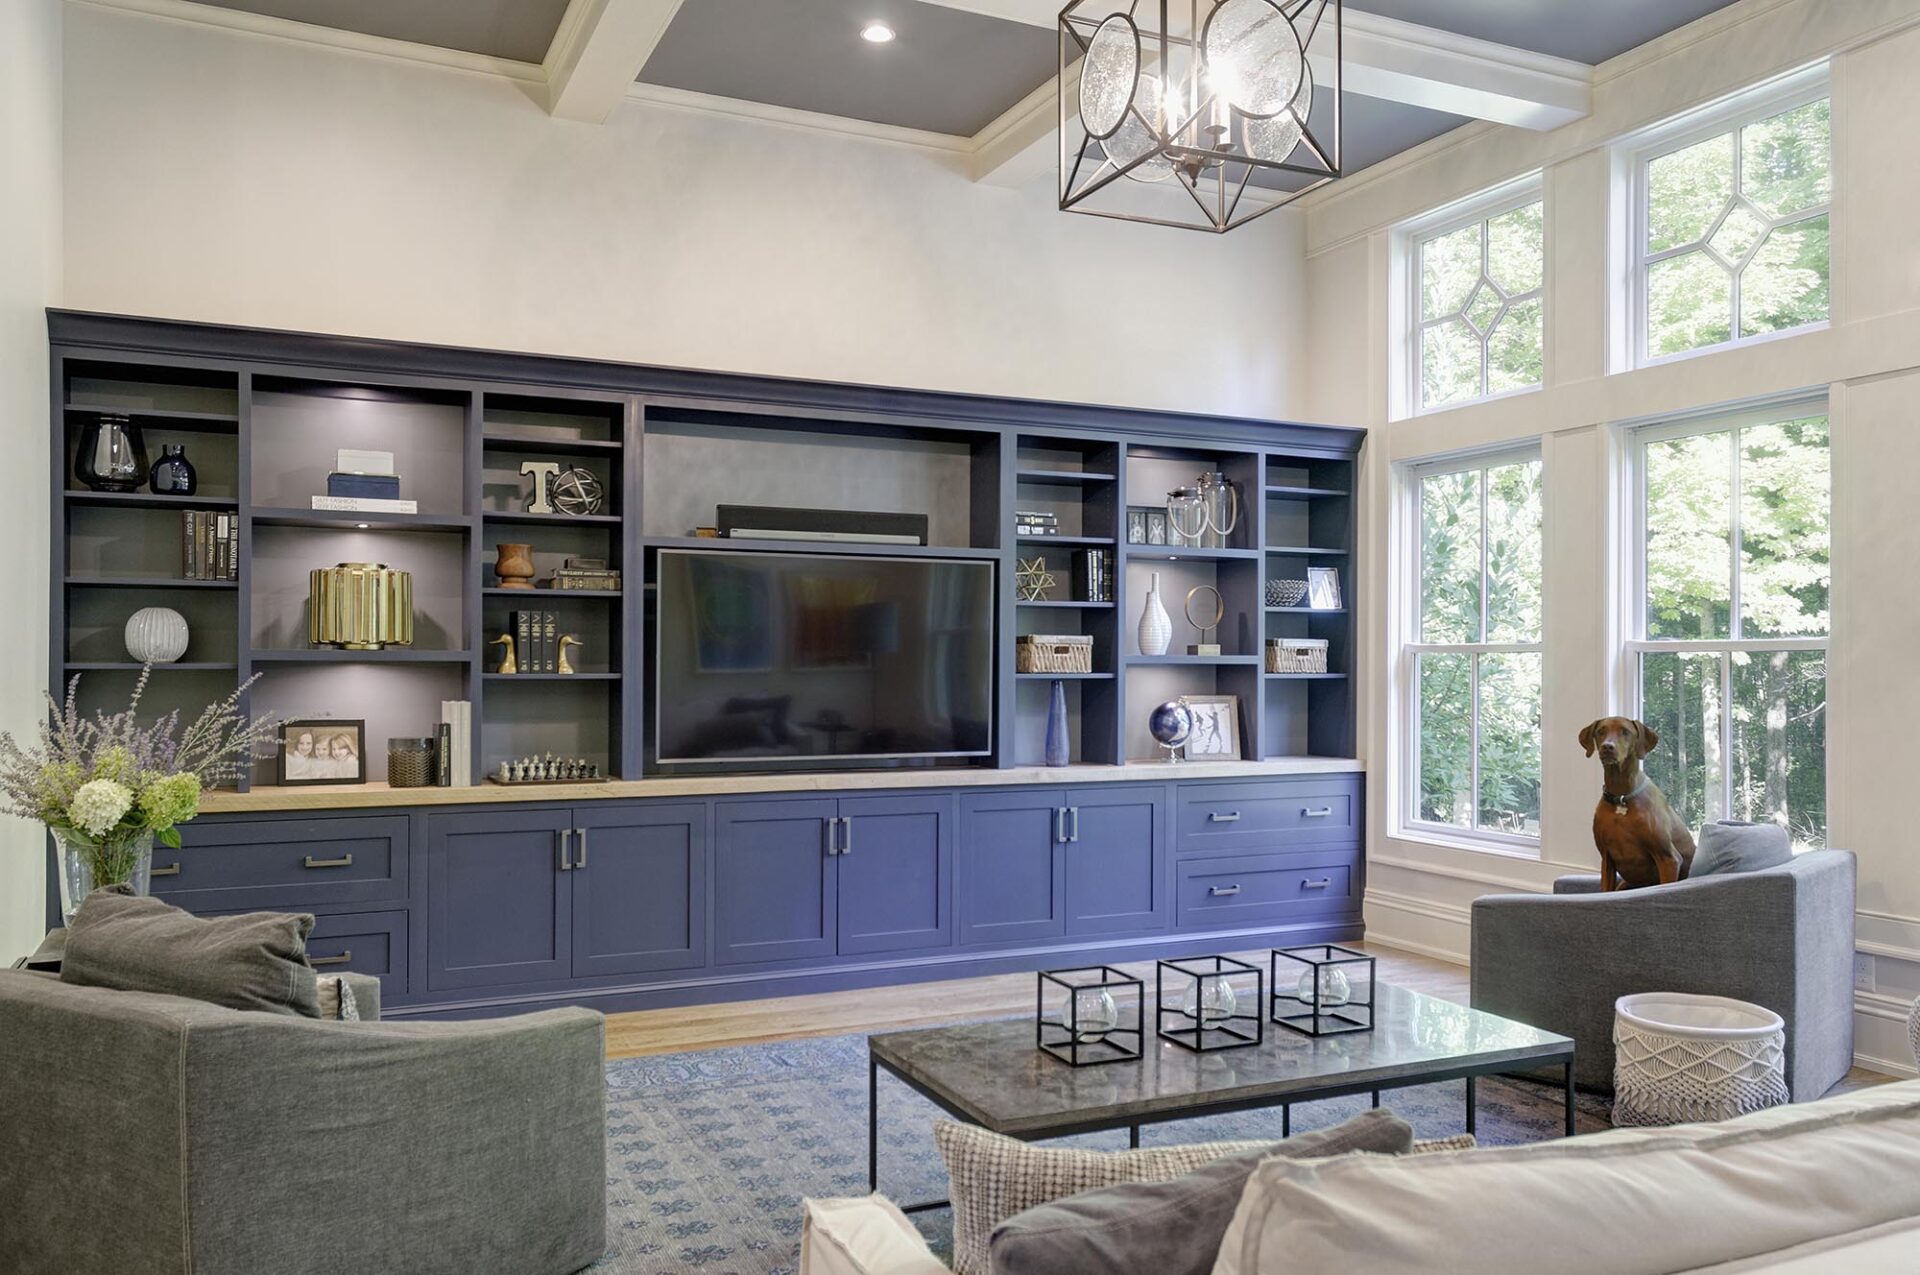 Living Room, Dublin, Dave fox, Remodel, Coffered ceilings, large windows, blue, built ins